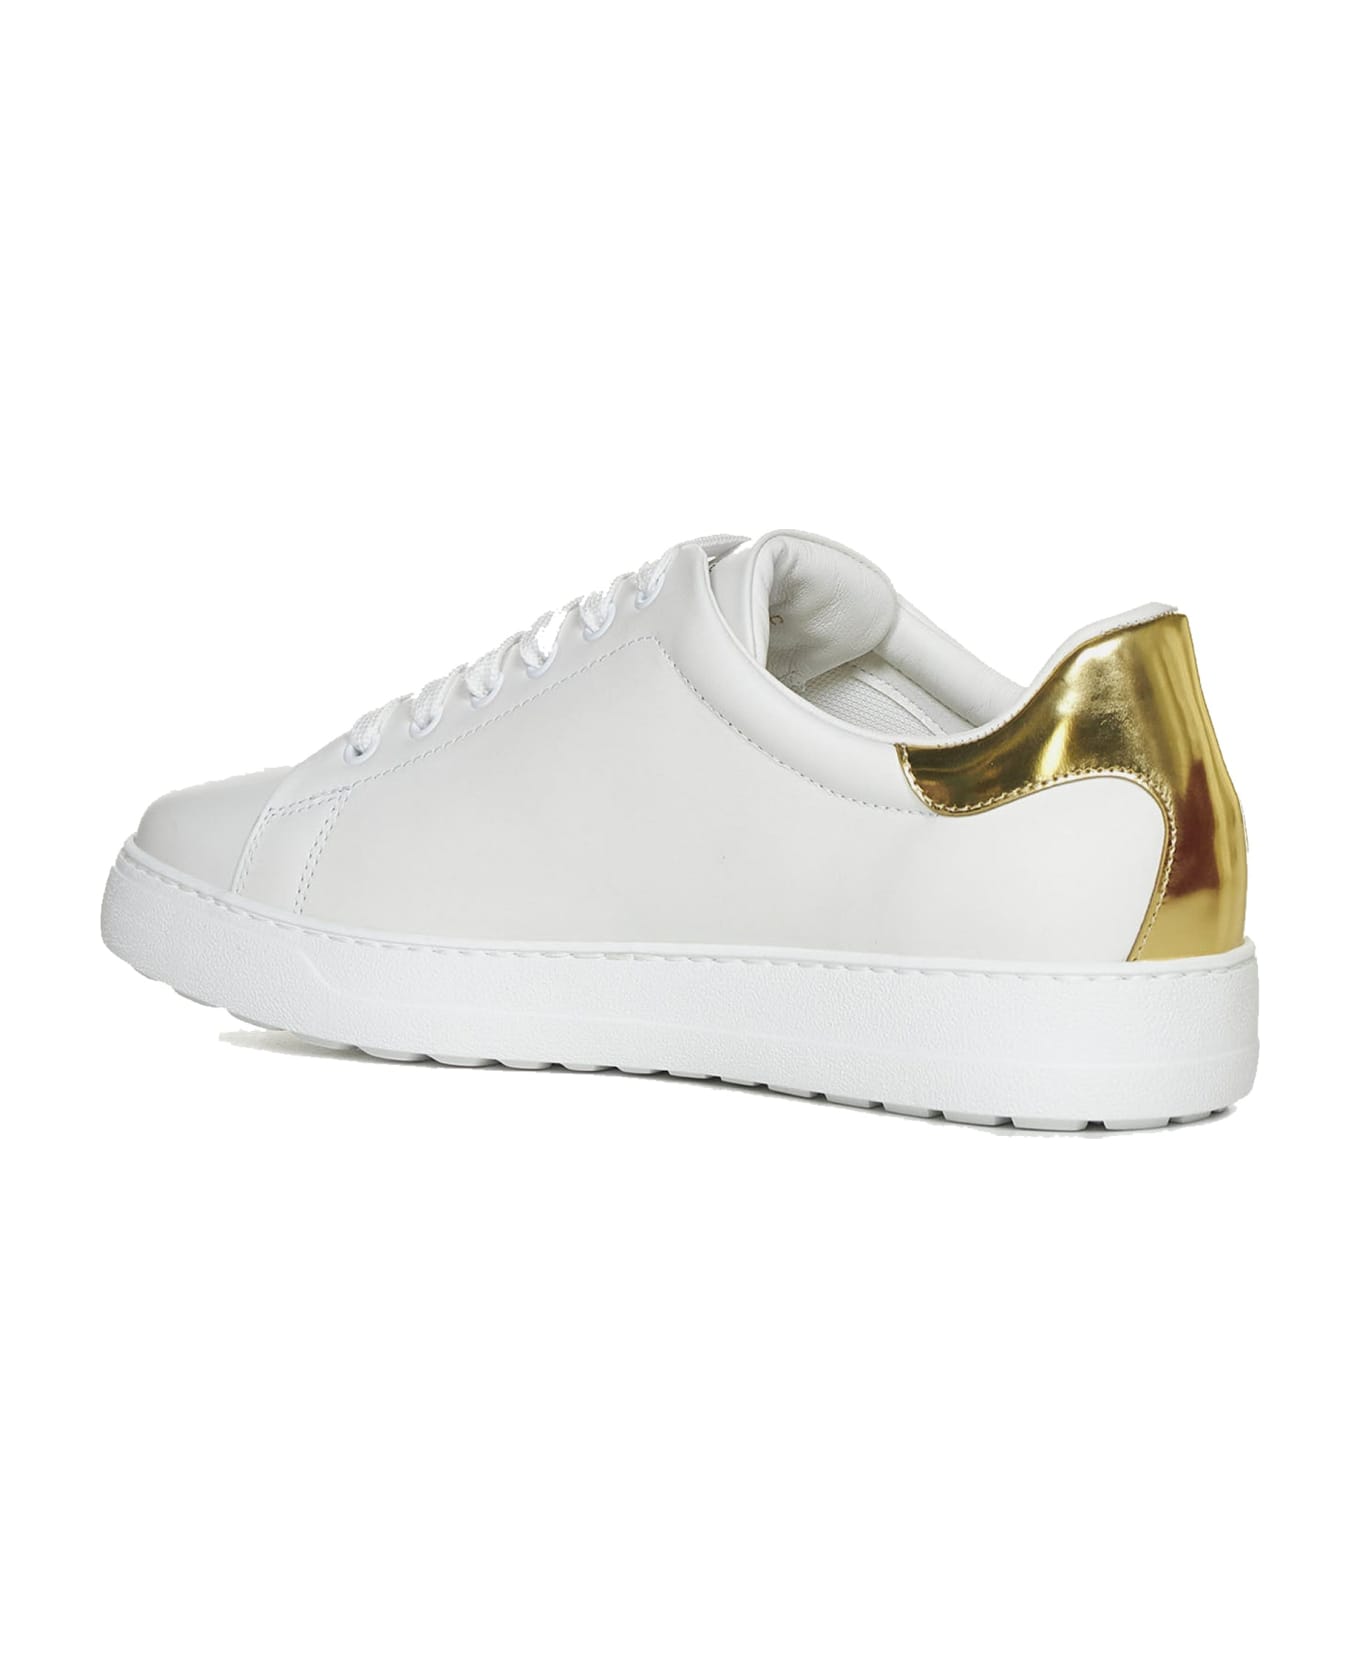 Ferragamo Number Leather Sneakers - White